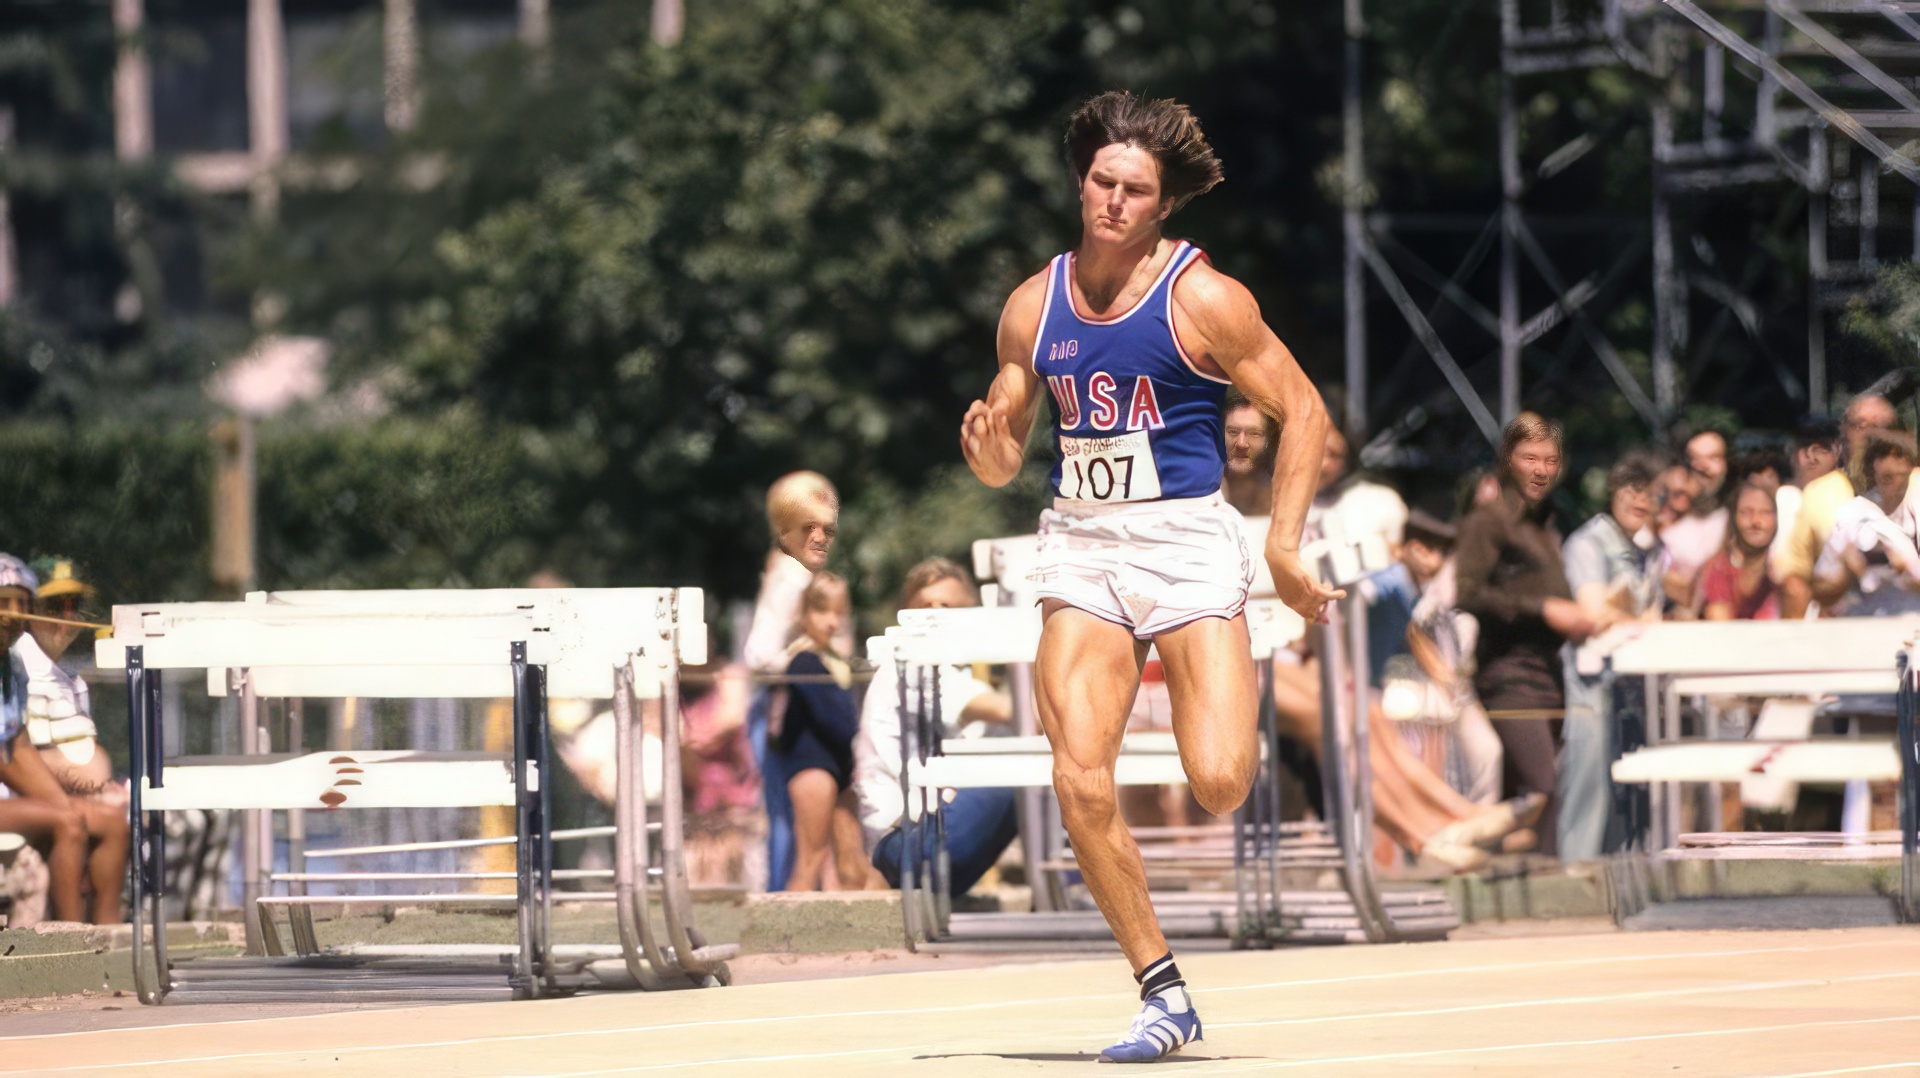 Bruce Jenner went in for athletics